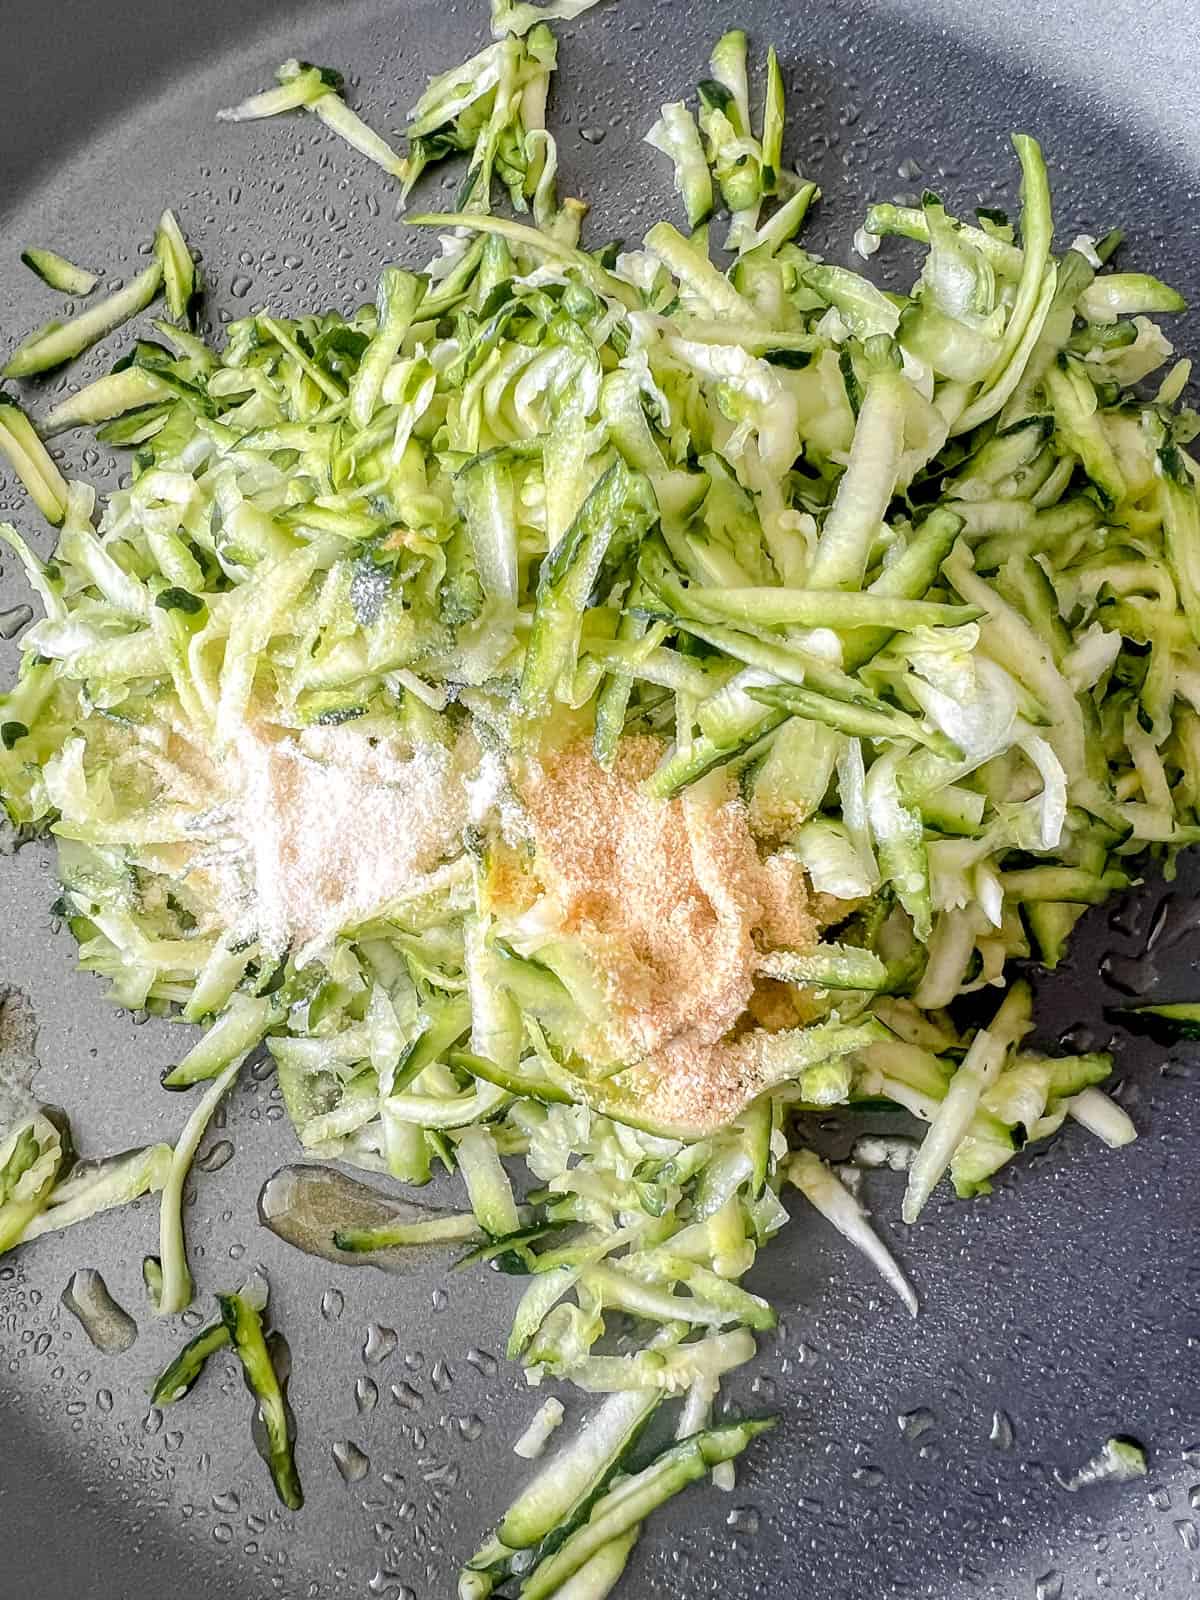 Shredded zucchini in a pan with spices.